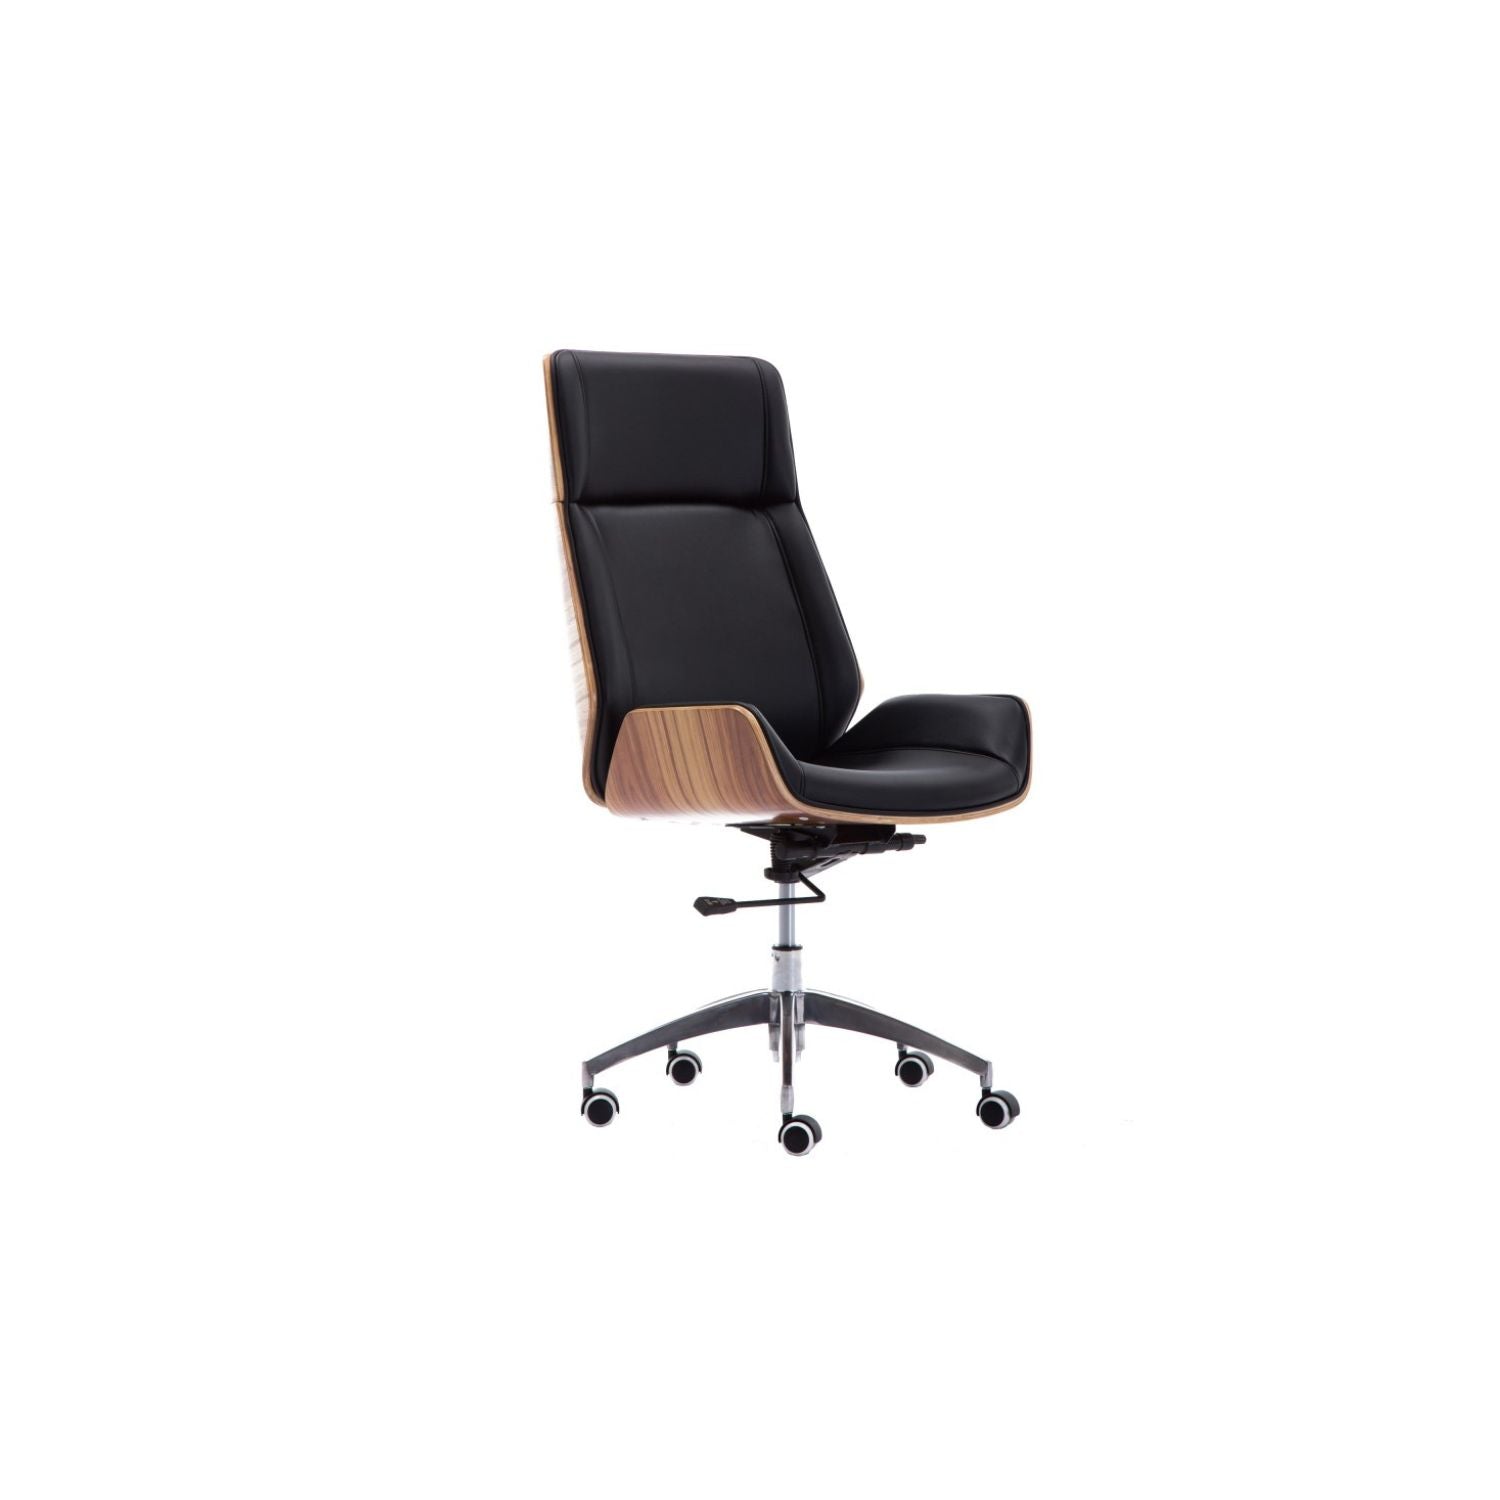 Chaise gaming Hucoco KRAFT - Fauteuil gamer style moderne bureau